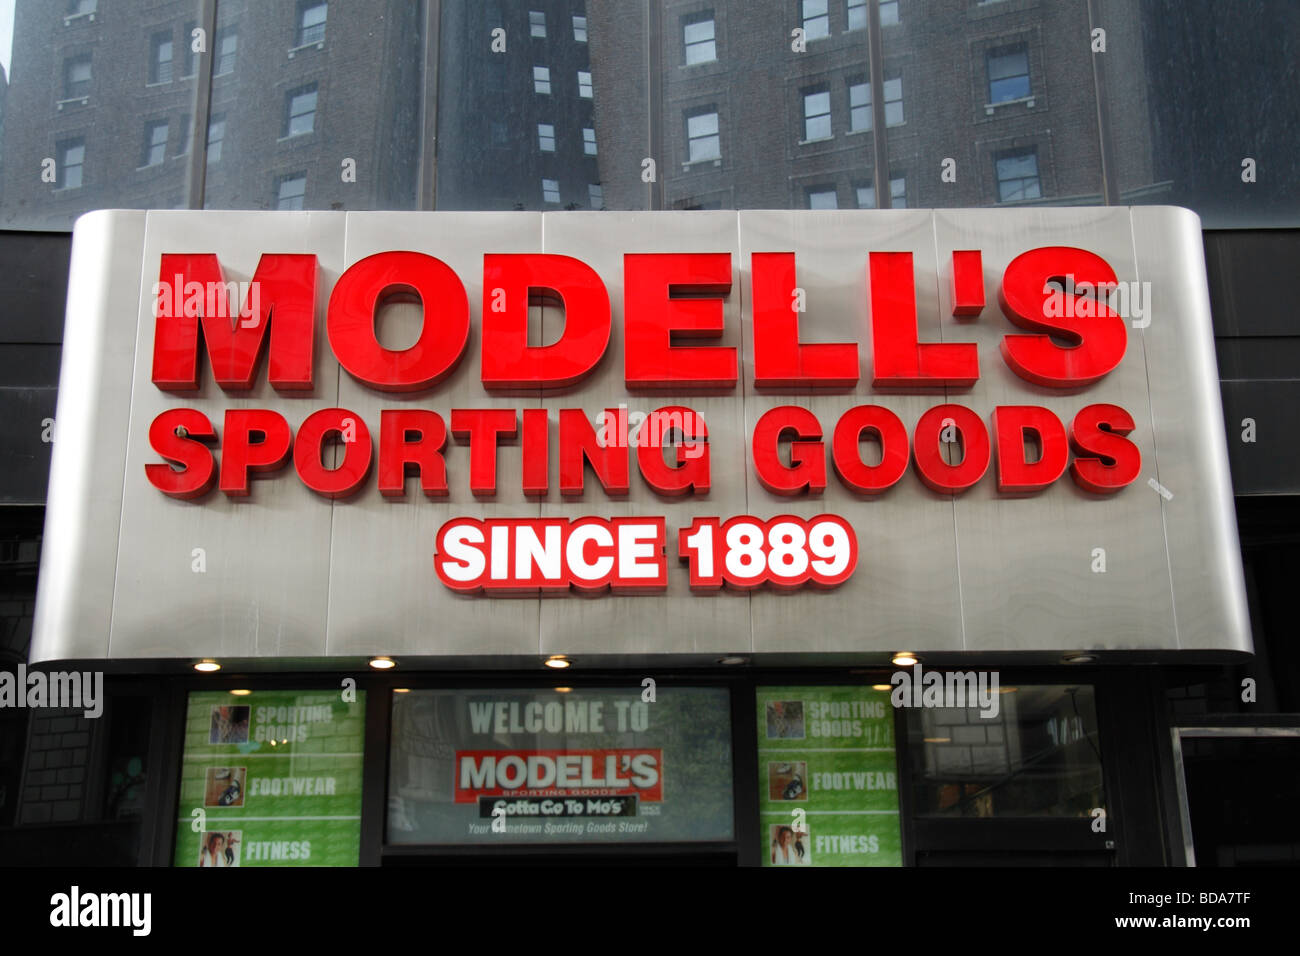 The sign above the store front of the Modell's Sporting Goods Broadway New York, United States. Stock Photo